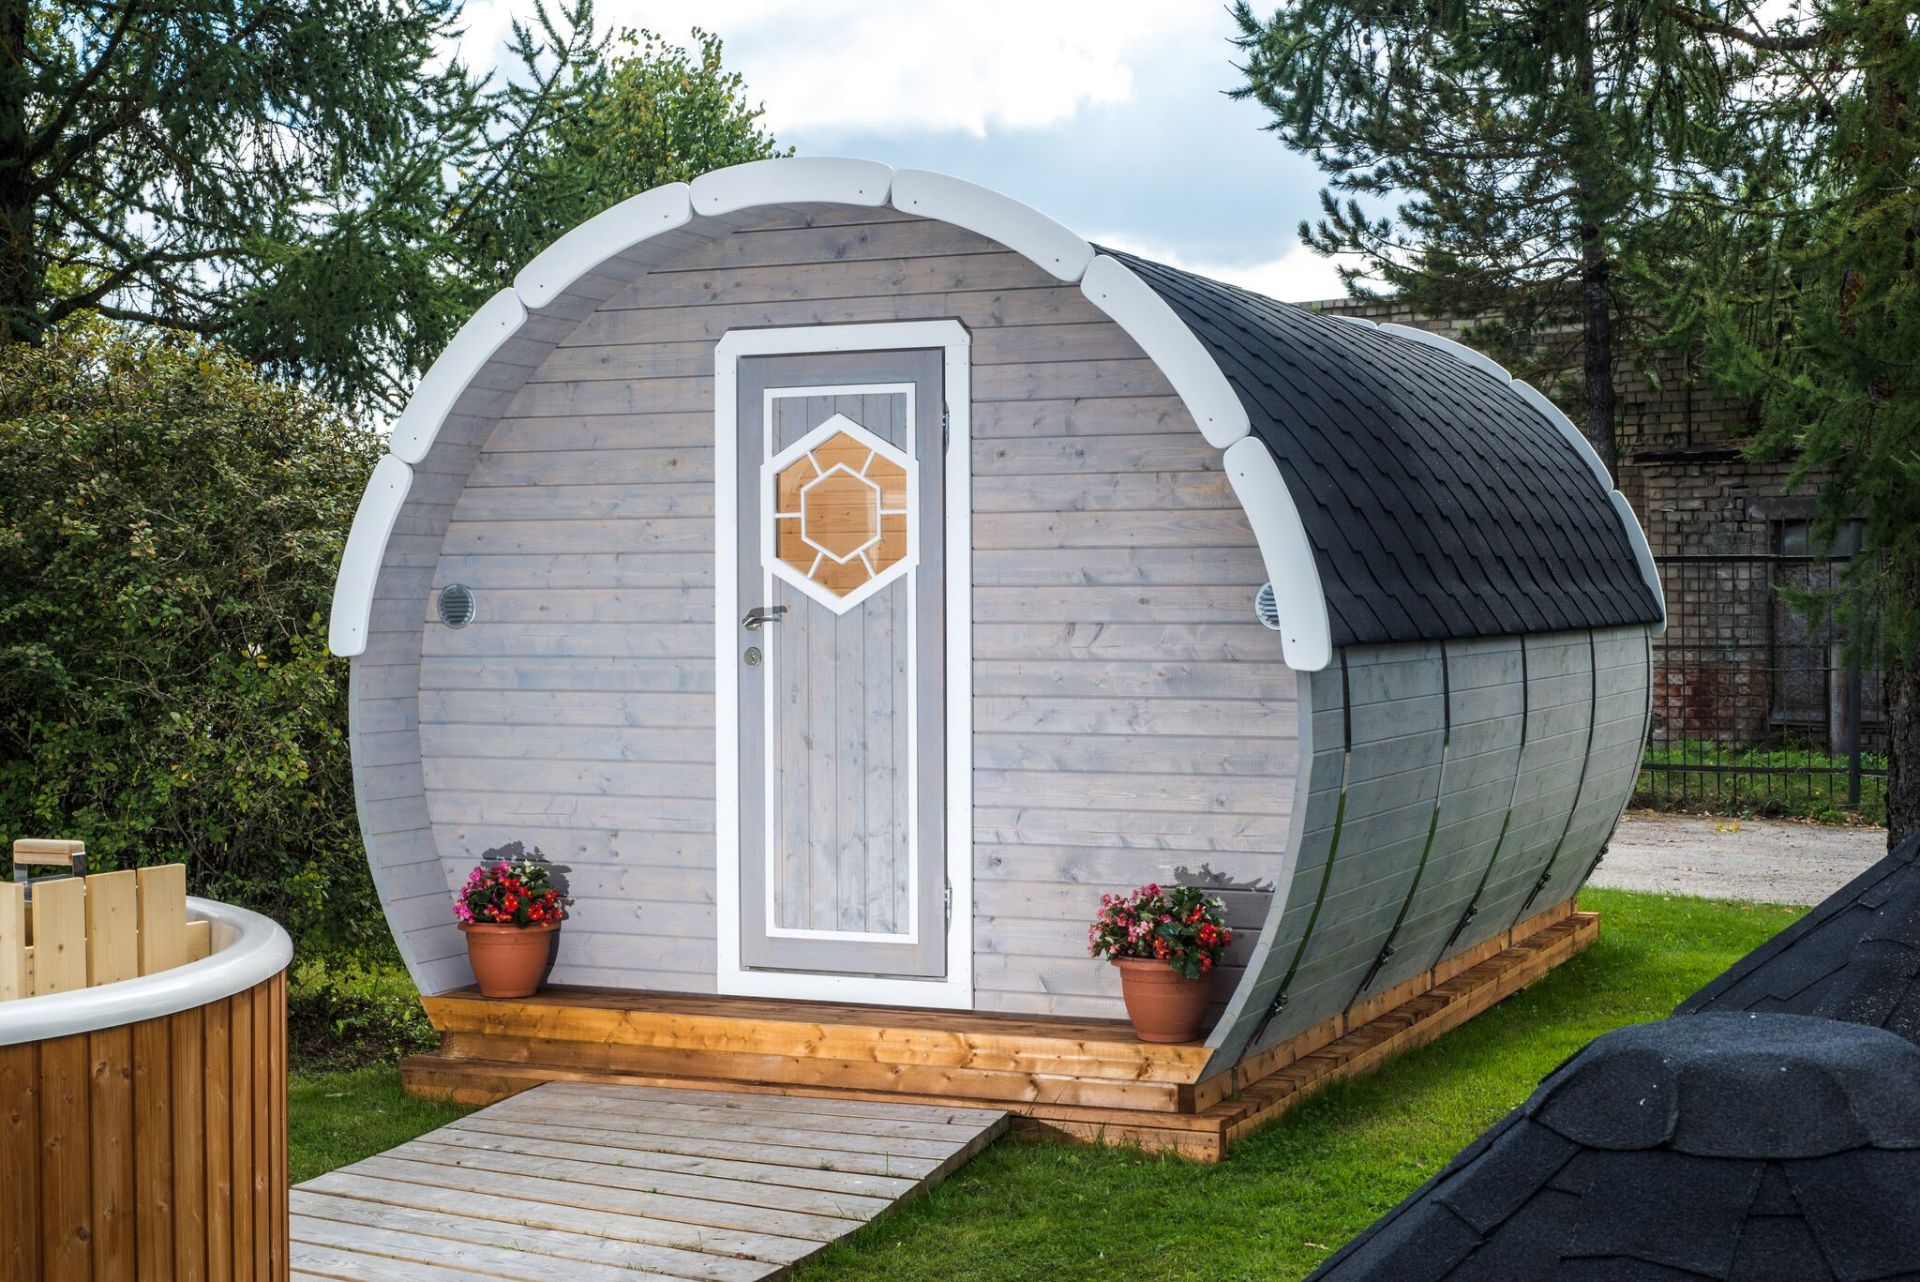 V Brand New 9.5M sq Ice-Viking Barrel- Two Rooms (2x2.3m Sleeping Room and Entrance room with - Image 2 of 5